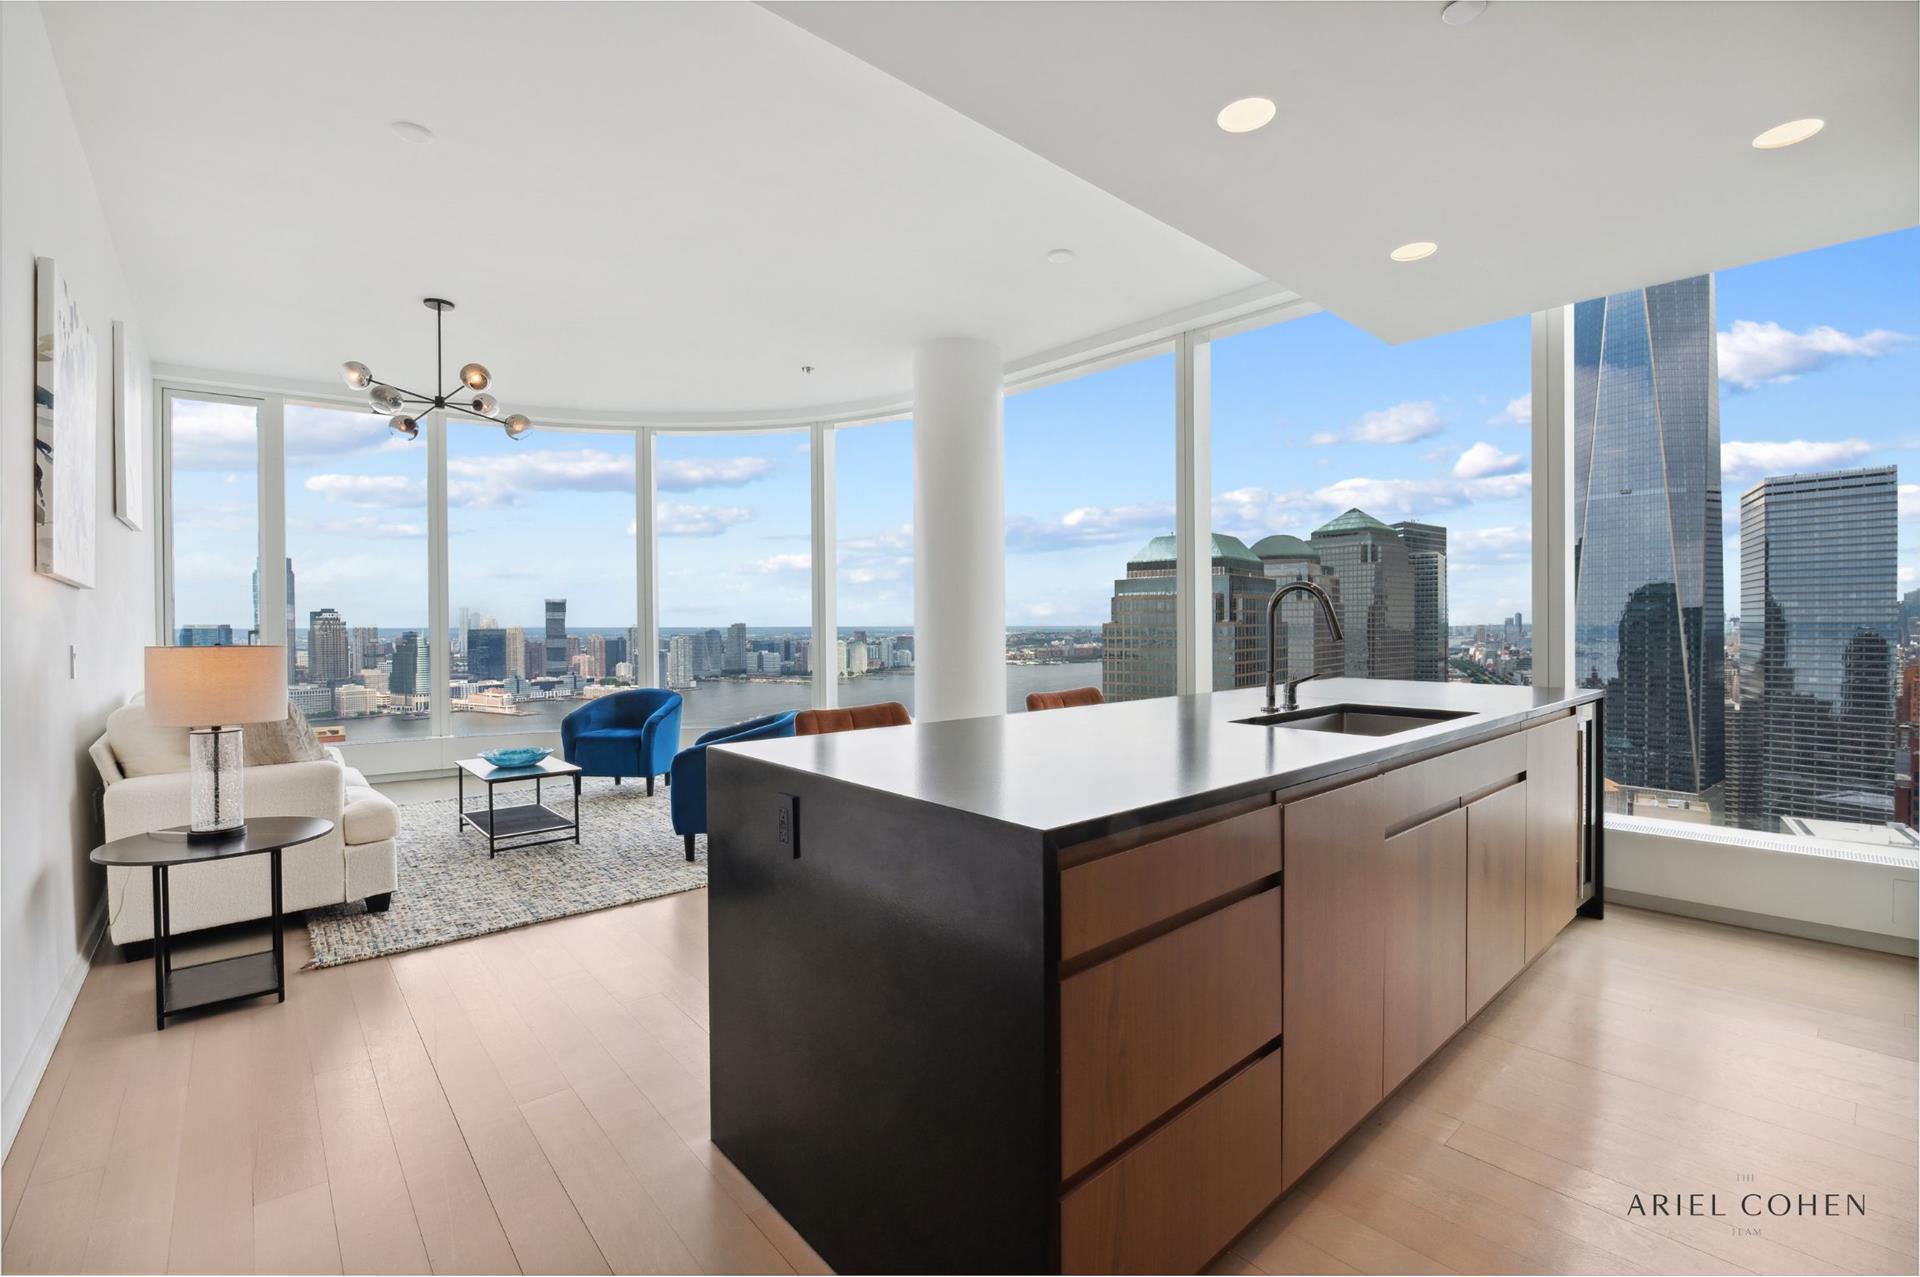 50 West Street 43D, Financial District, Downtown, NYC - 2 Bedrooms  
2 Bathrooms  
4 Rooms - 